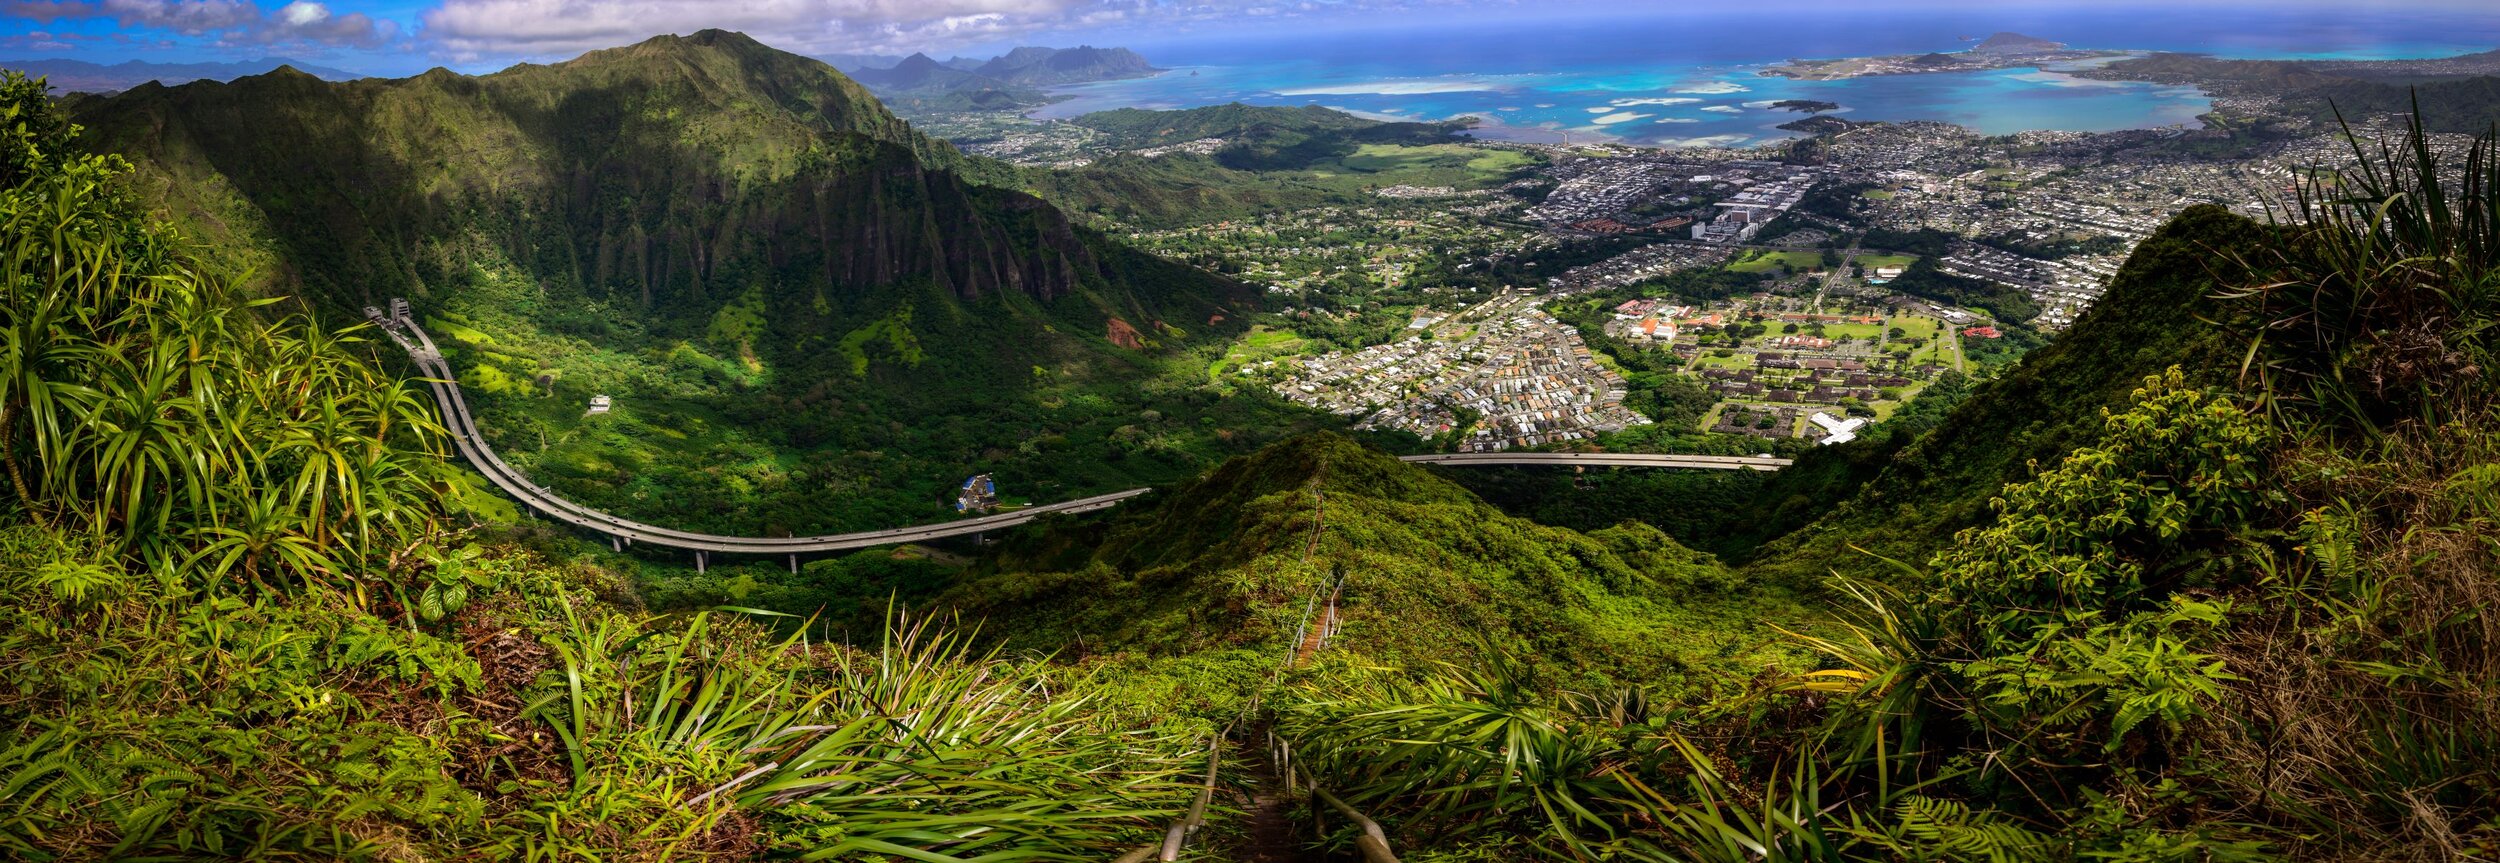 Stairway to Heaven in Hawaii: Everything you Need to Know - My